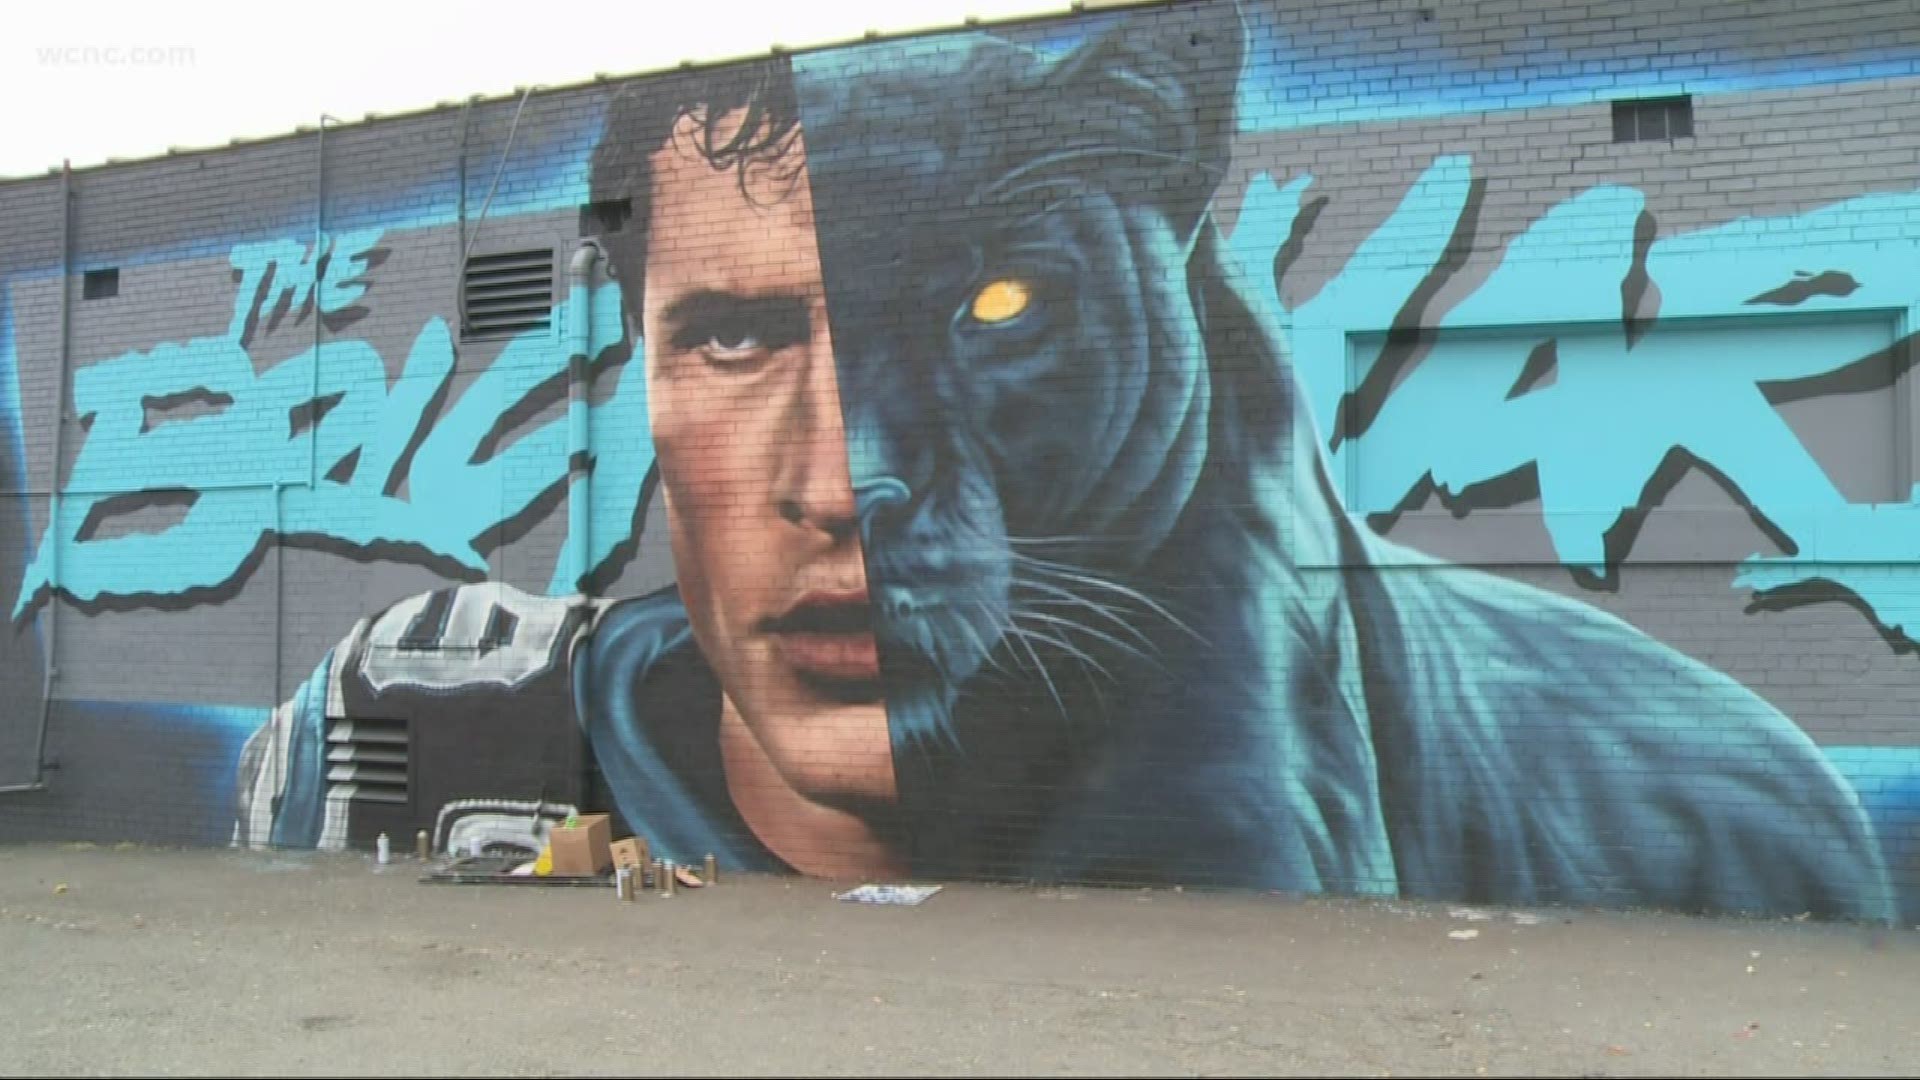 Two local artists, Matt Moore and Matt Hooker, teamed up with The Brickyard to bring the idea to life. Luke Kuechly even made a stop by to see the mural for himself.